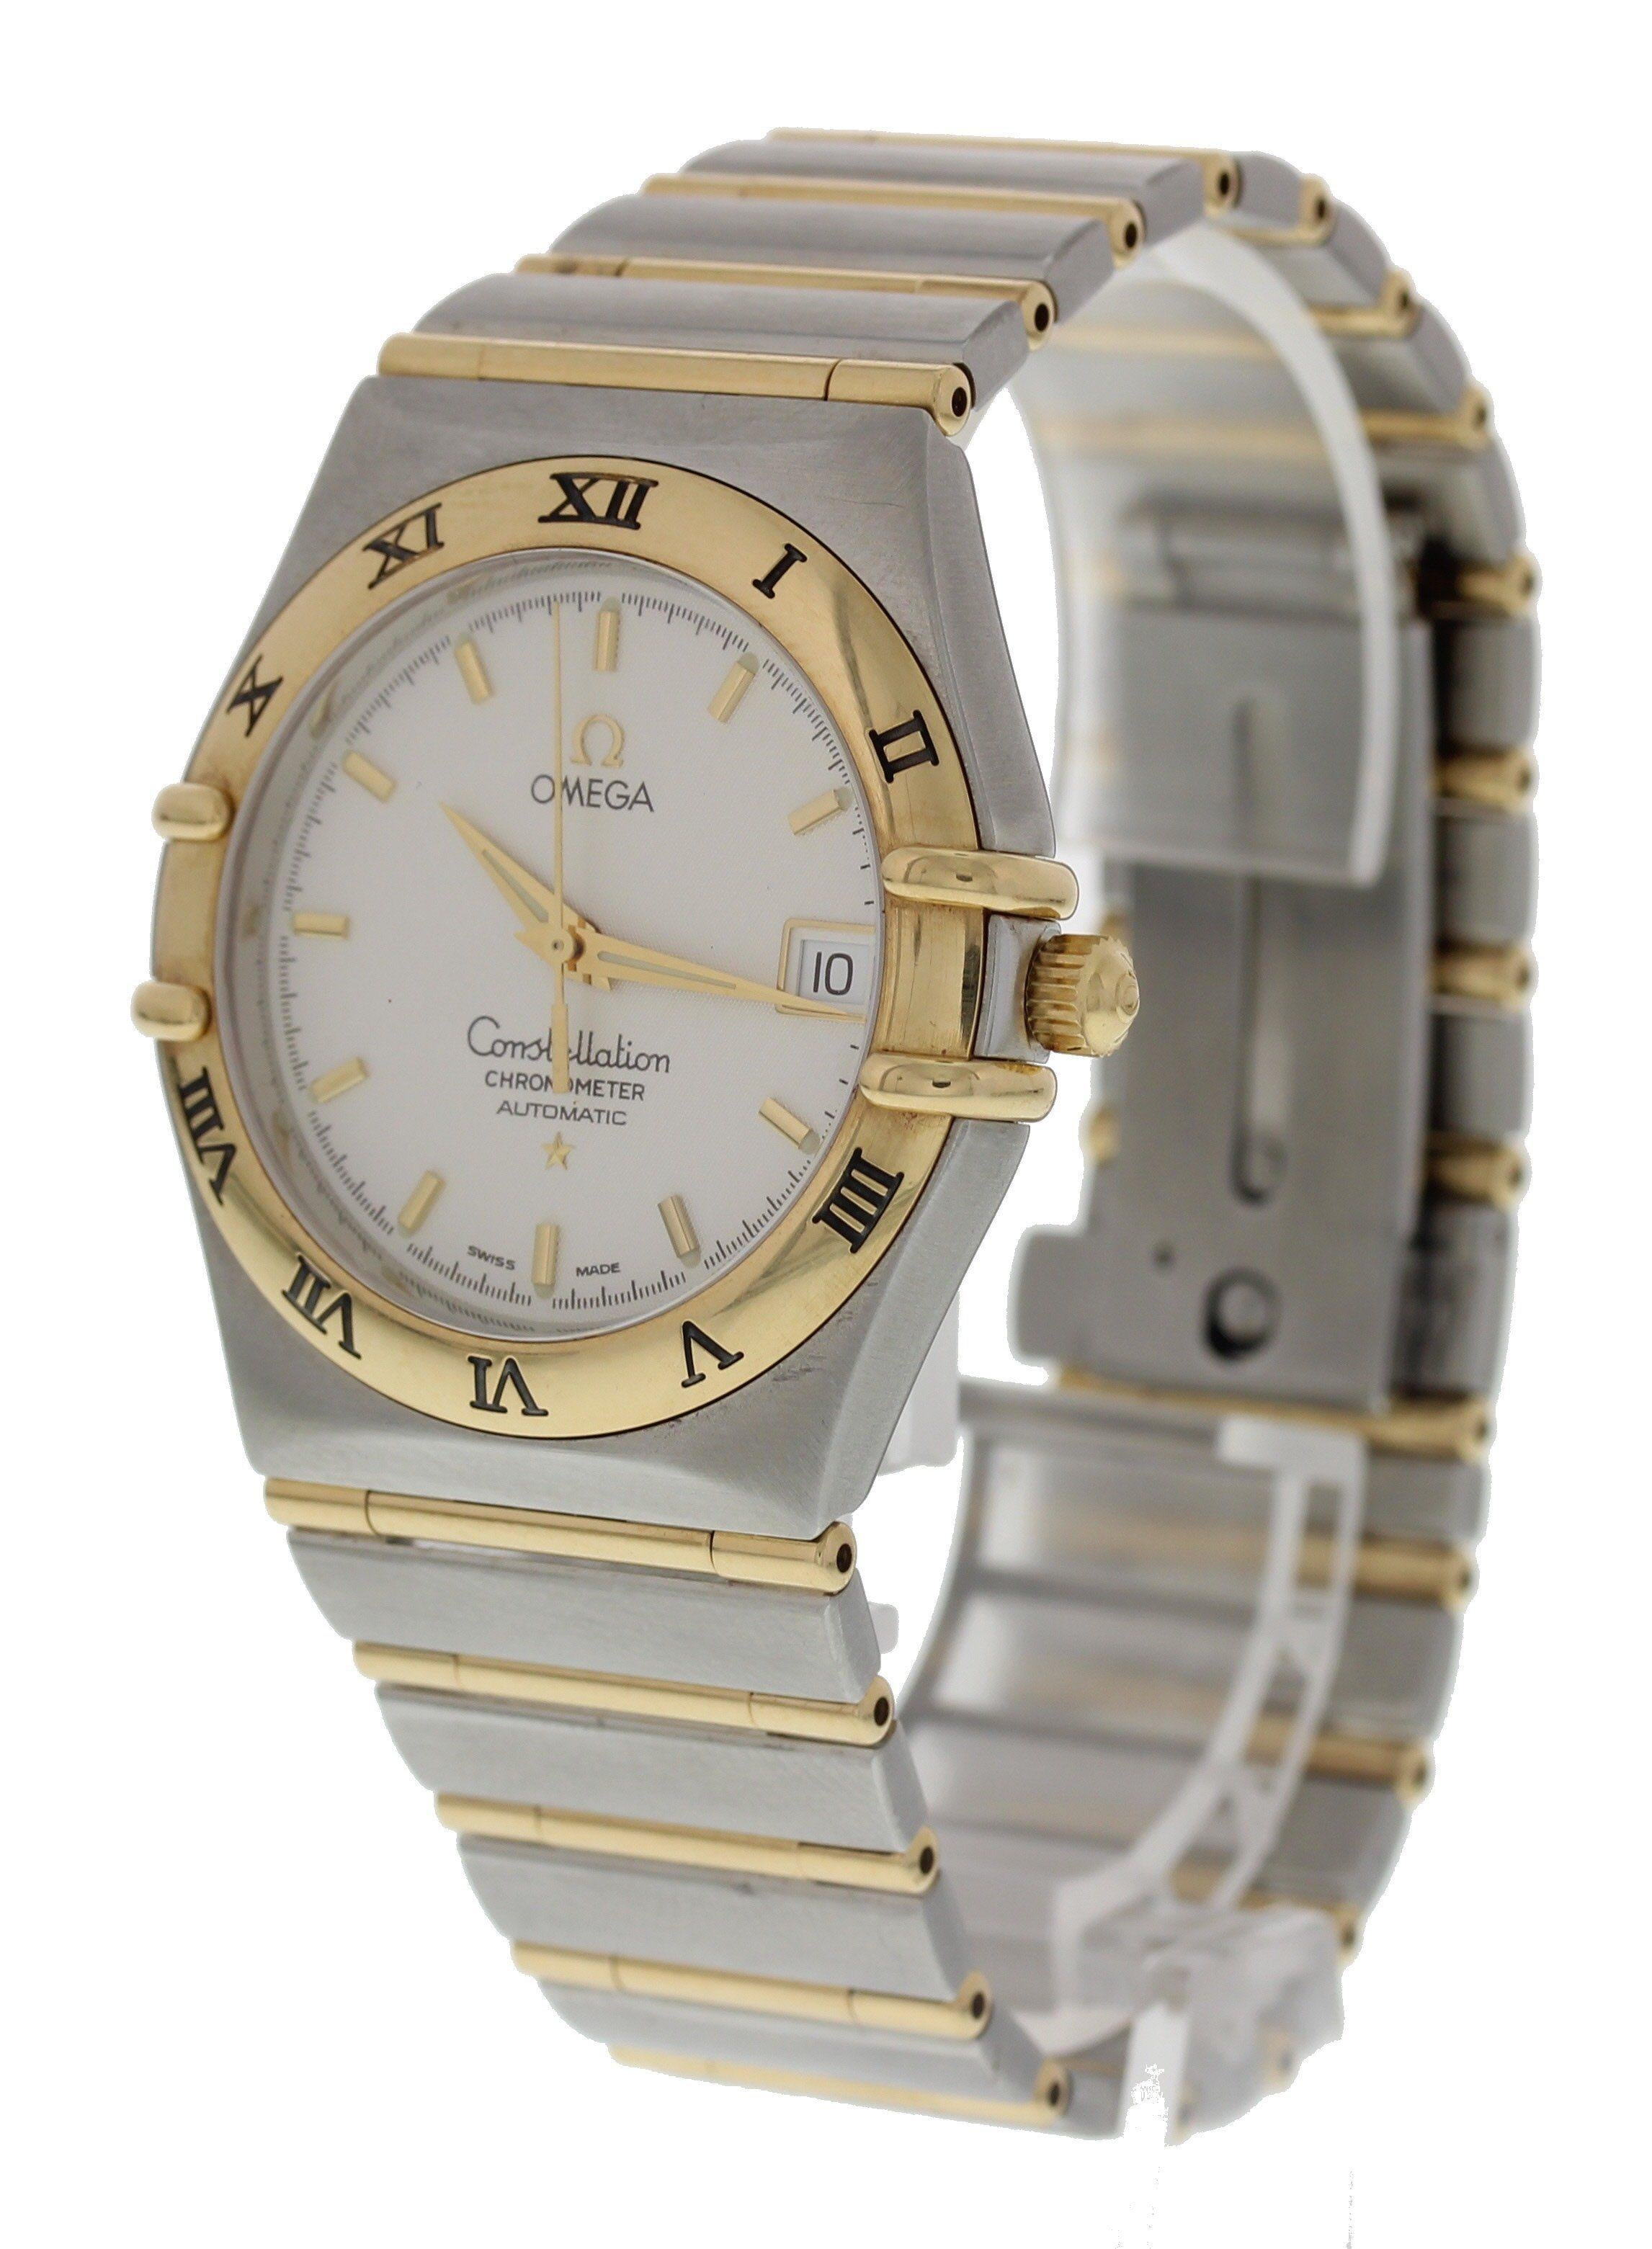 Omega Constellation 1302.10.00 Men's Watch. 
36mm Stainless Steel case. 
Yellow Gold Stationary bezel. 
White dial with gold hands and index hour markers. 
Minute markers on the outer dial. 
Date display at the 3 o'clock position. 
Stainless Steel